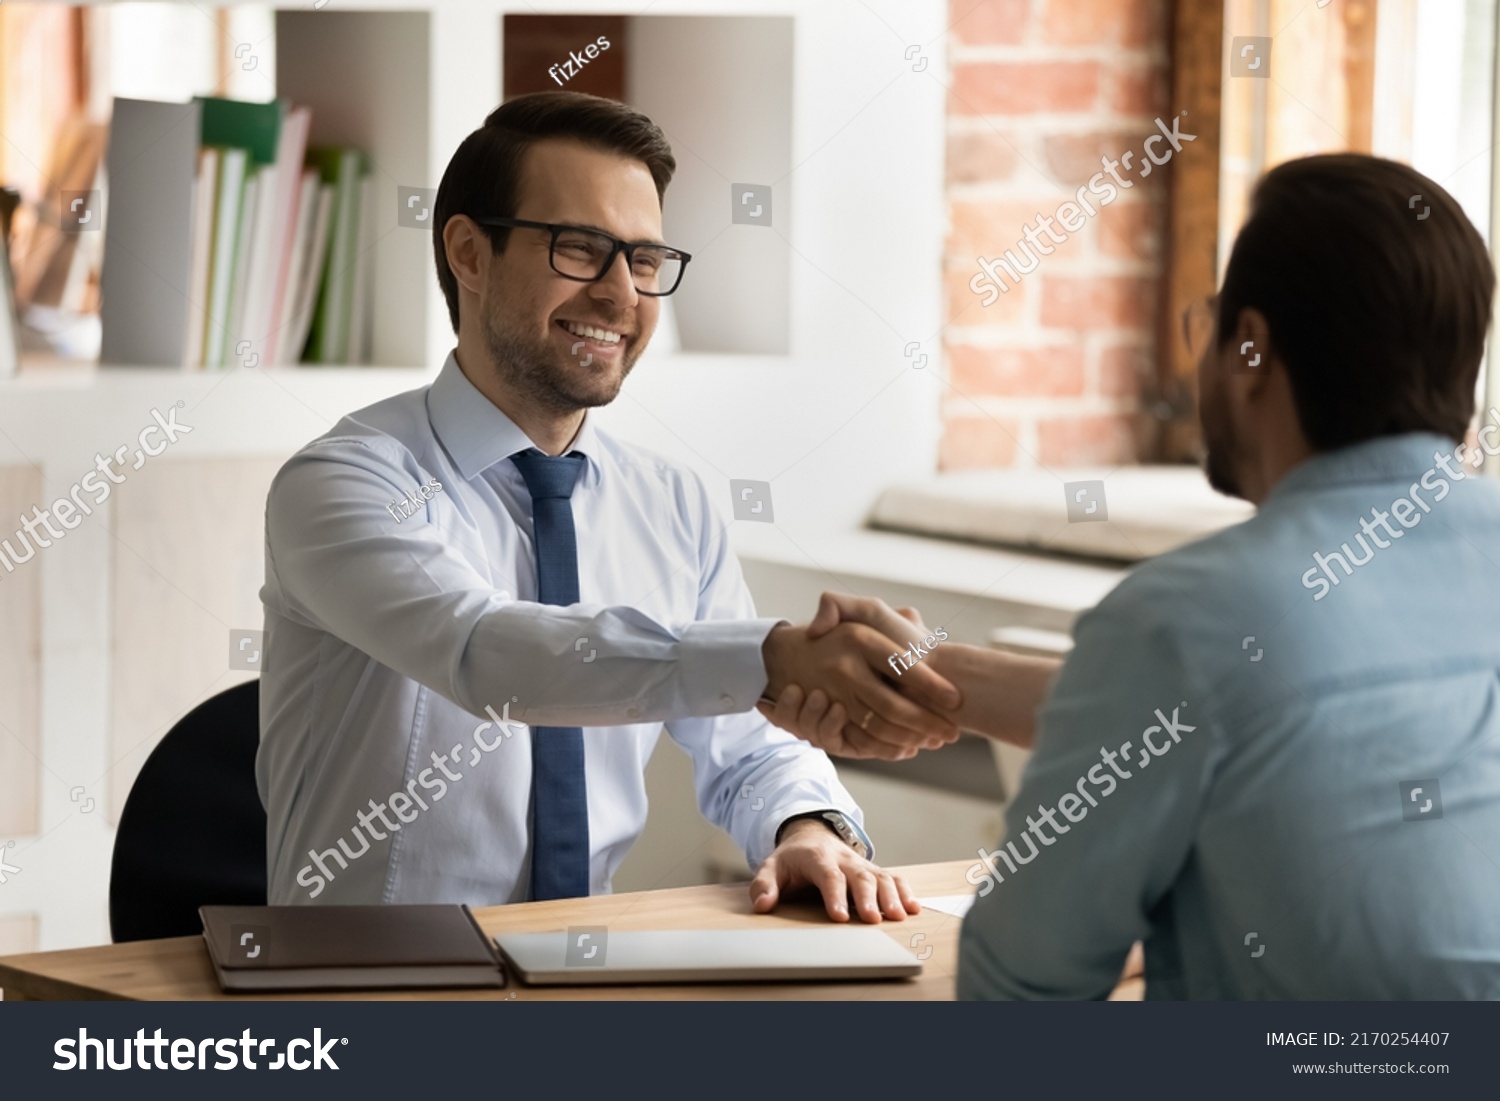 HR manager handshakes company position candidate, selling insurance, professional services. Male entrepreneurs, broker and client shake hands start business meeting in office. Job interview concept #2170254407